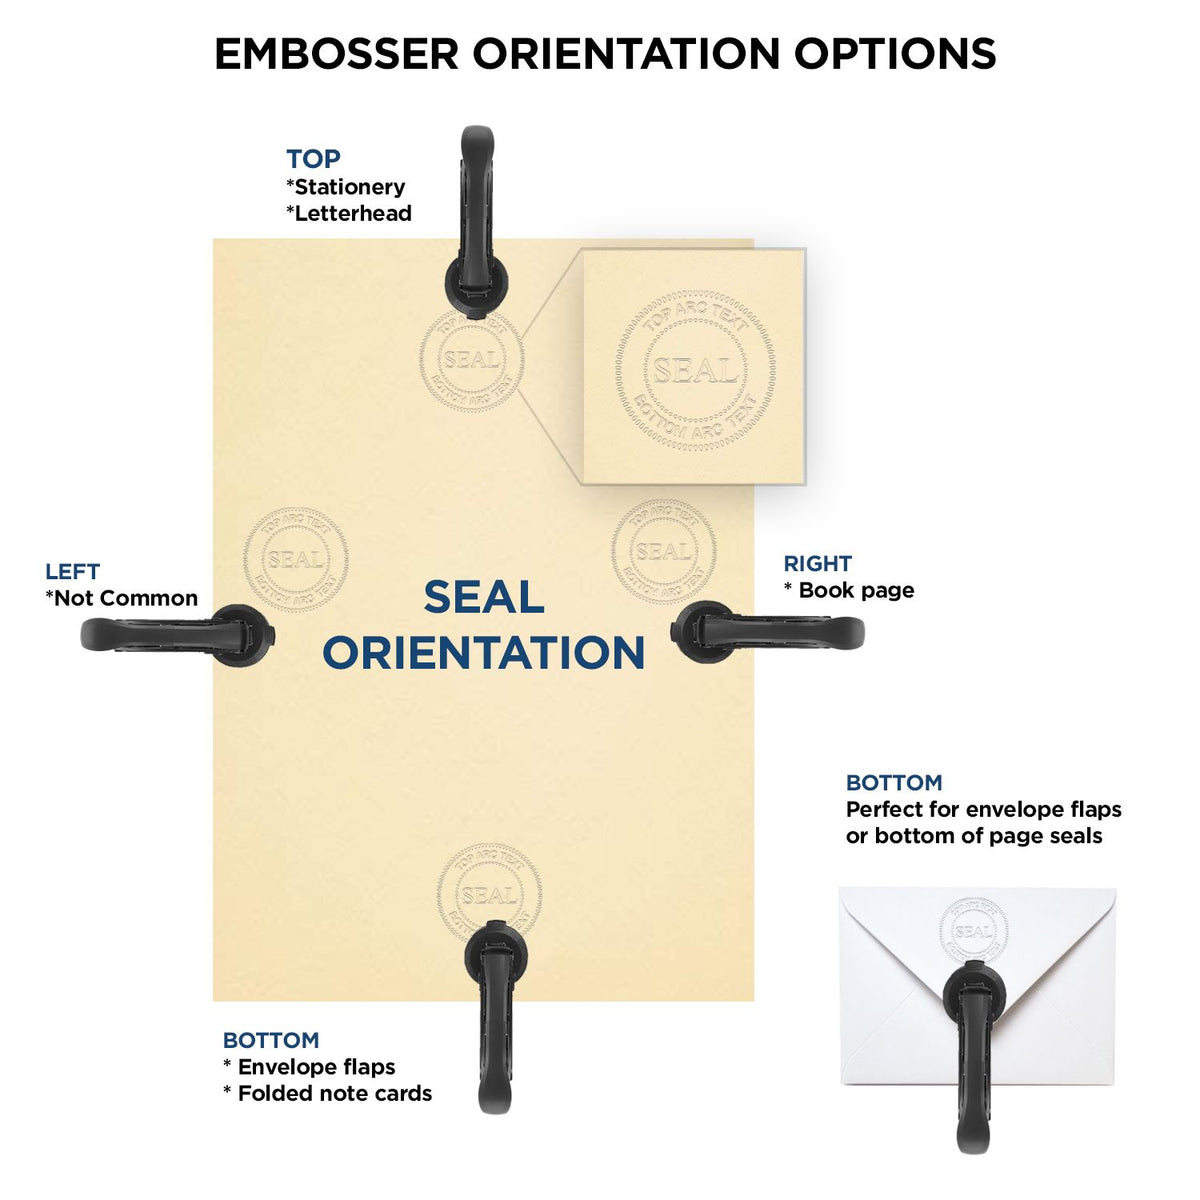 An infographic for the State of Wyoming Extended Long Reach Geologist Seal showing embosser orientation, this is showing examples of a top, bottom, right and left insert.